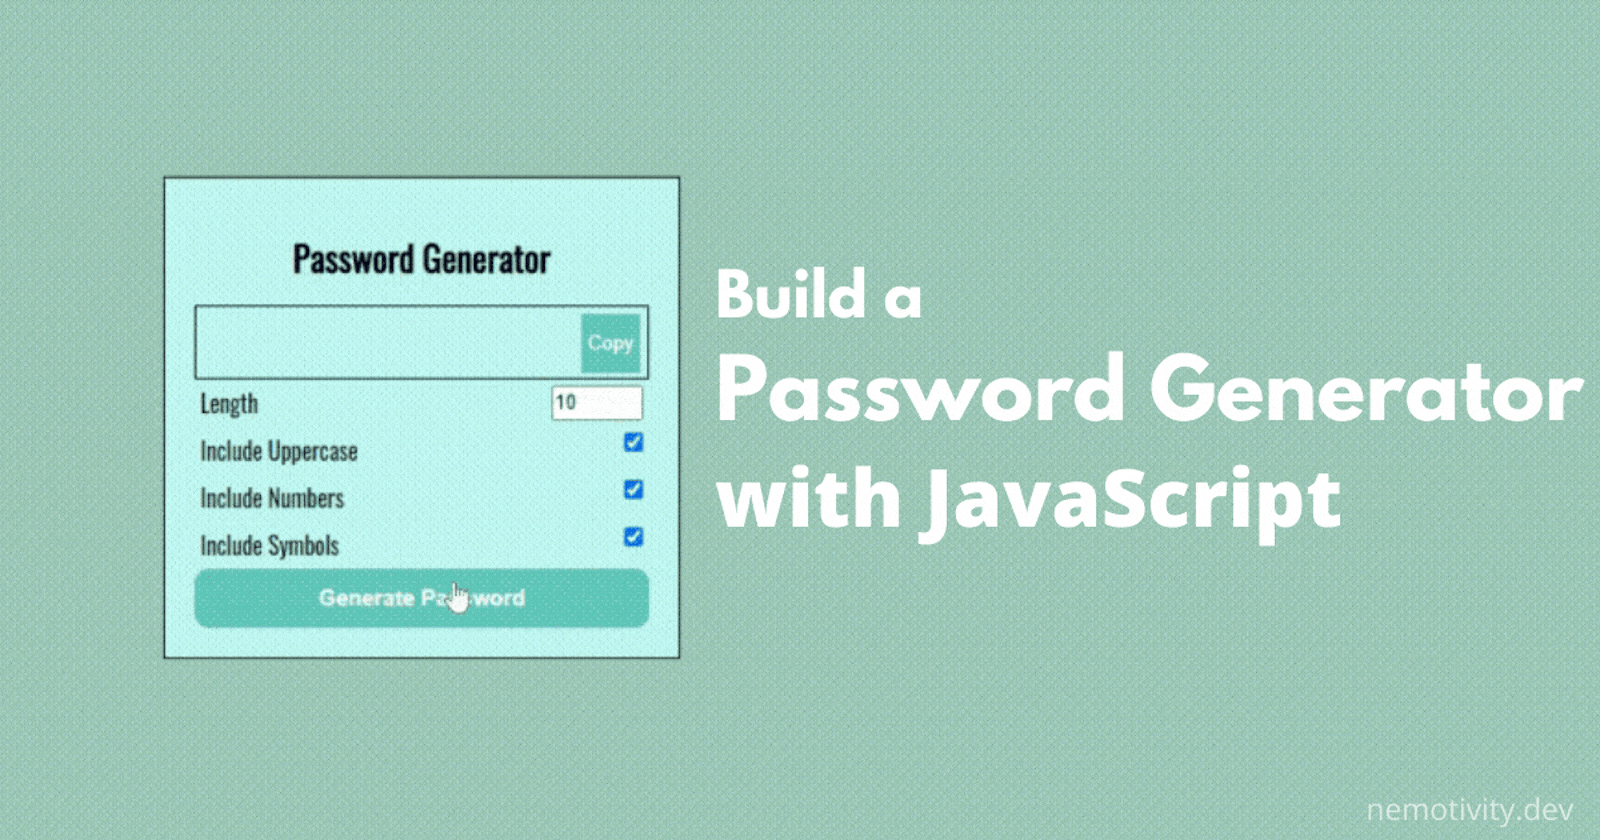 Build a Password Generator with JavaScript